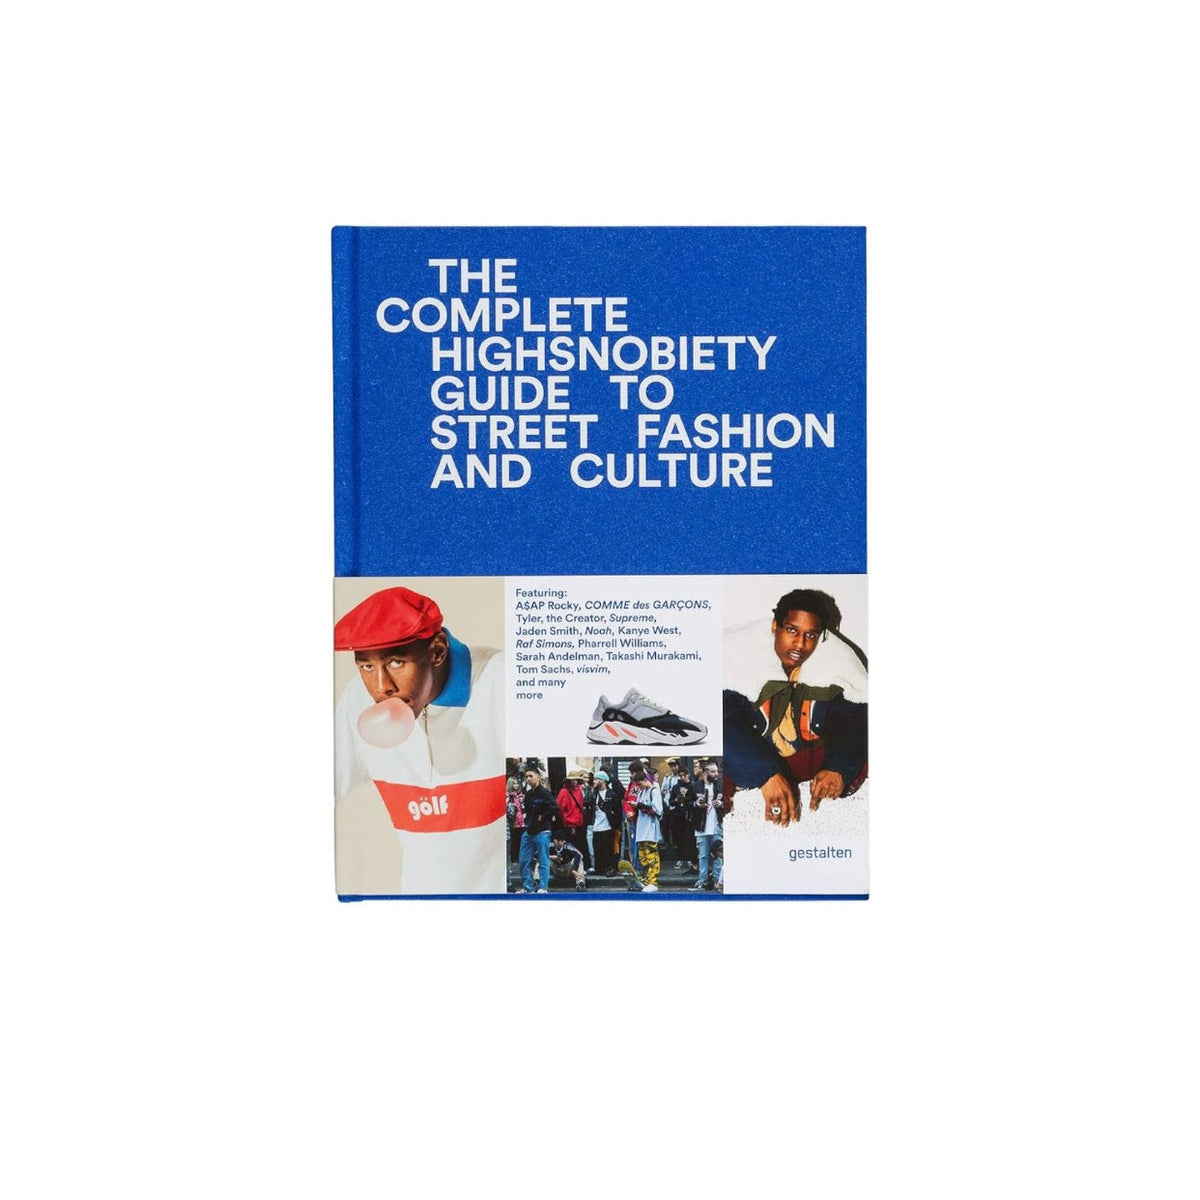 THE COMPLETE - HIGHSNOBIETY GUIDE TO STREET FASHION AND CULTURE